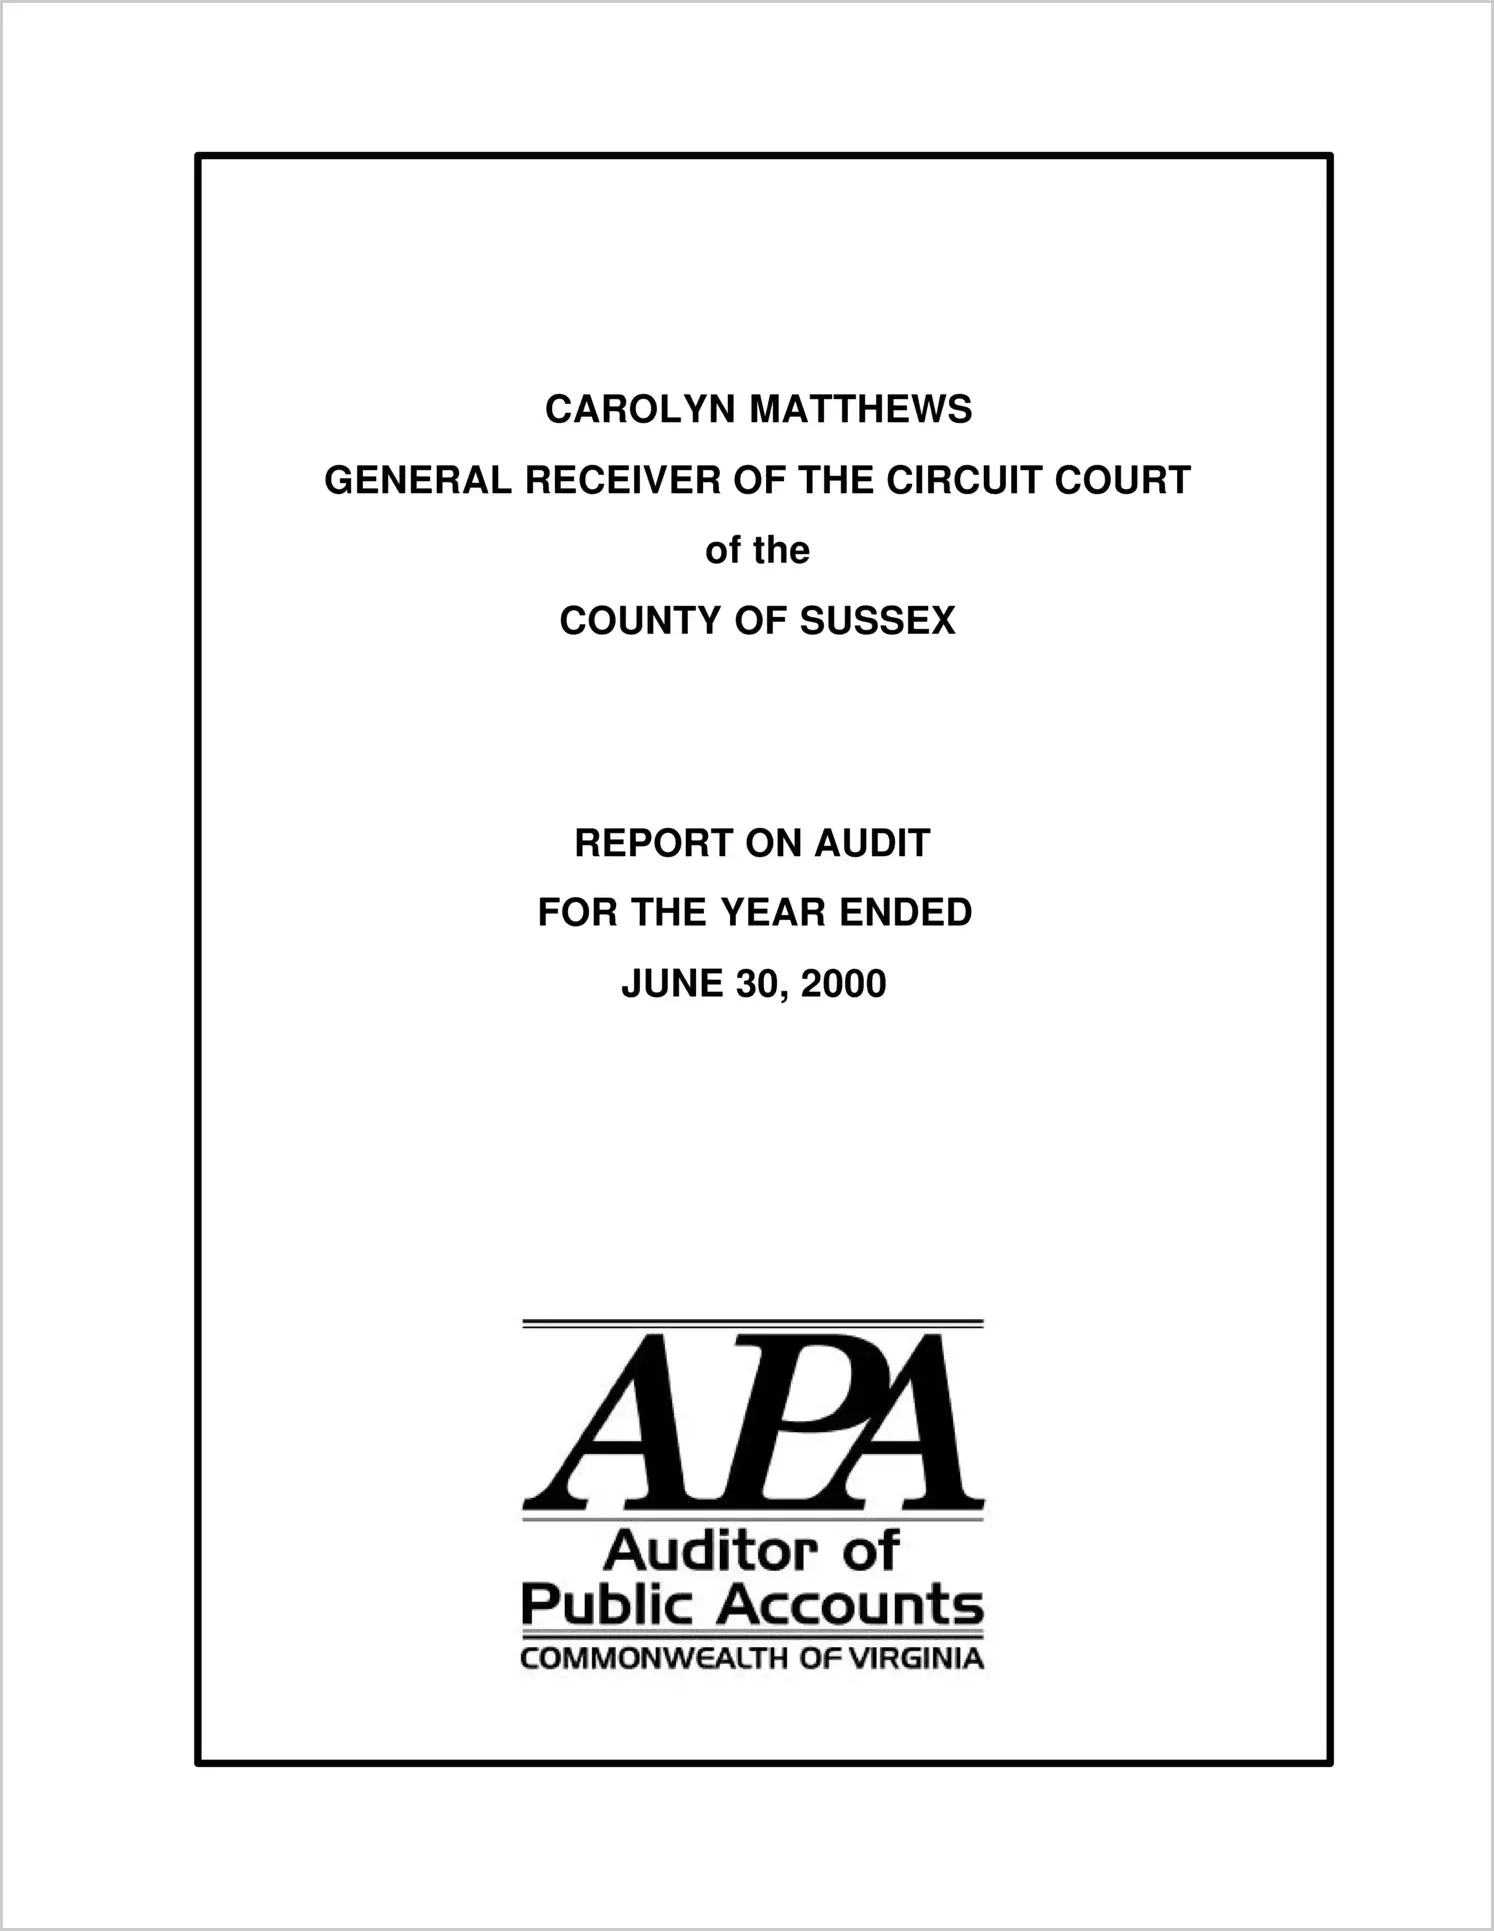 General Receiver of the Circuit Court of the County of Sussex for the period July 1, 1998 through June 30, 2000